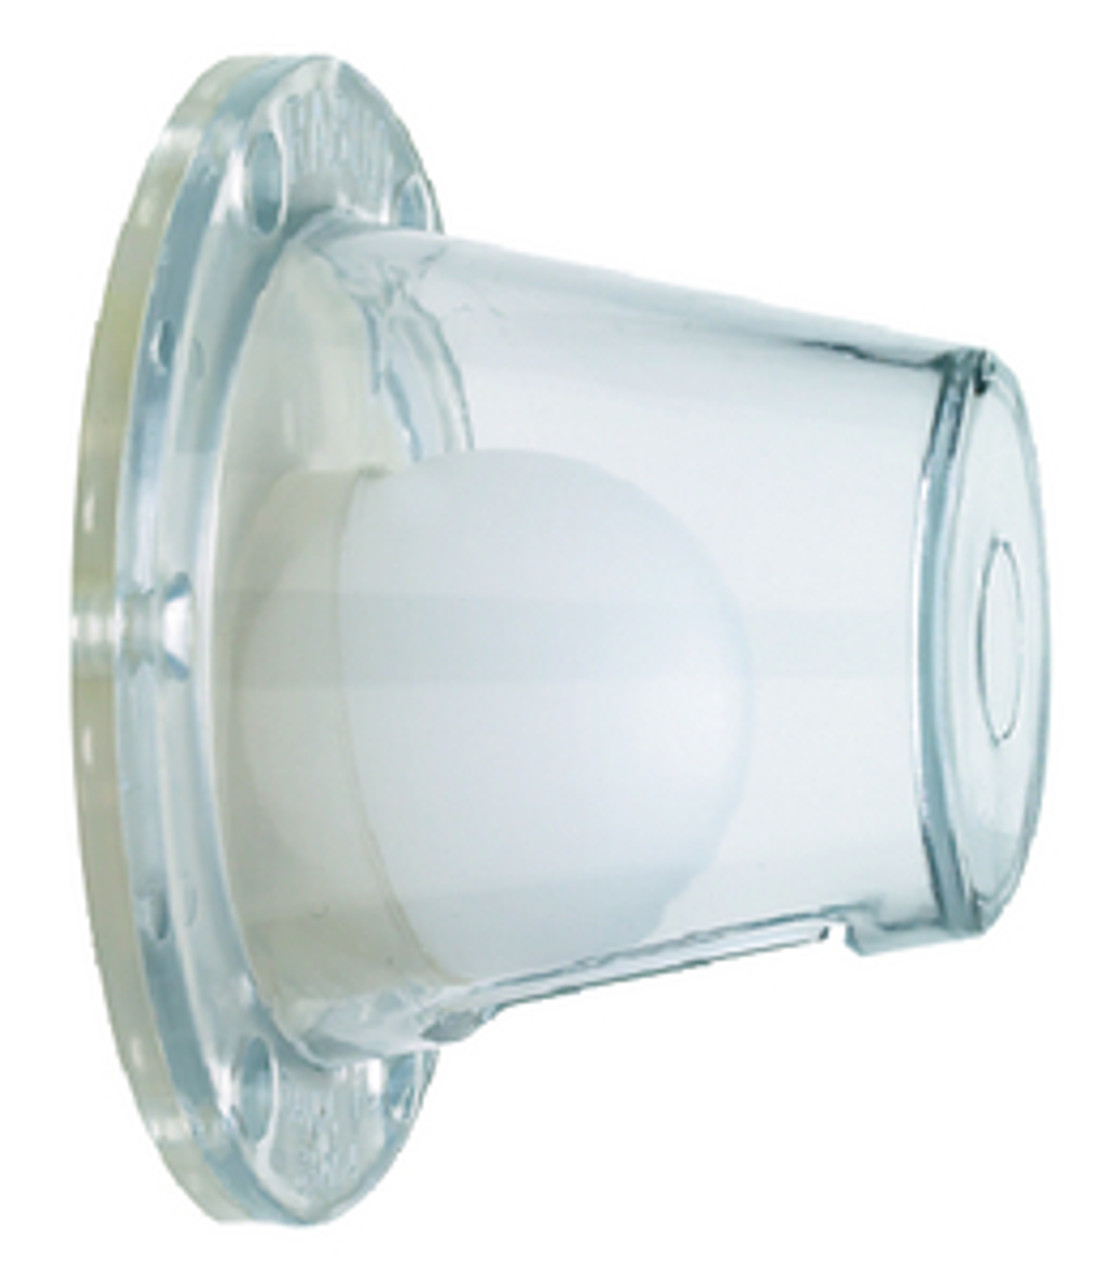 Clear Plastic Large Self Bailing Deck Ball Scupper Valve for 1-1/2" to 3" Holes